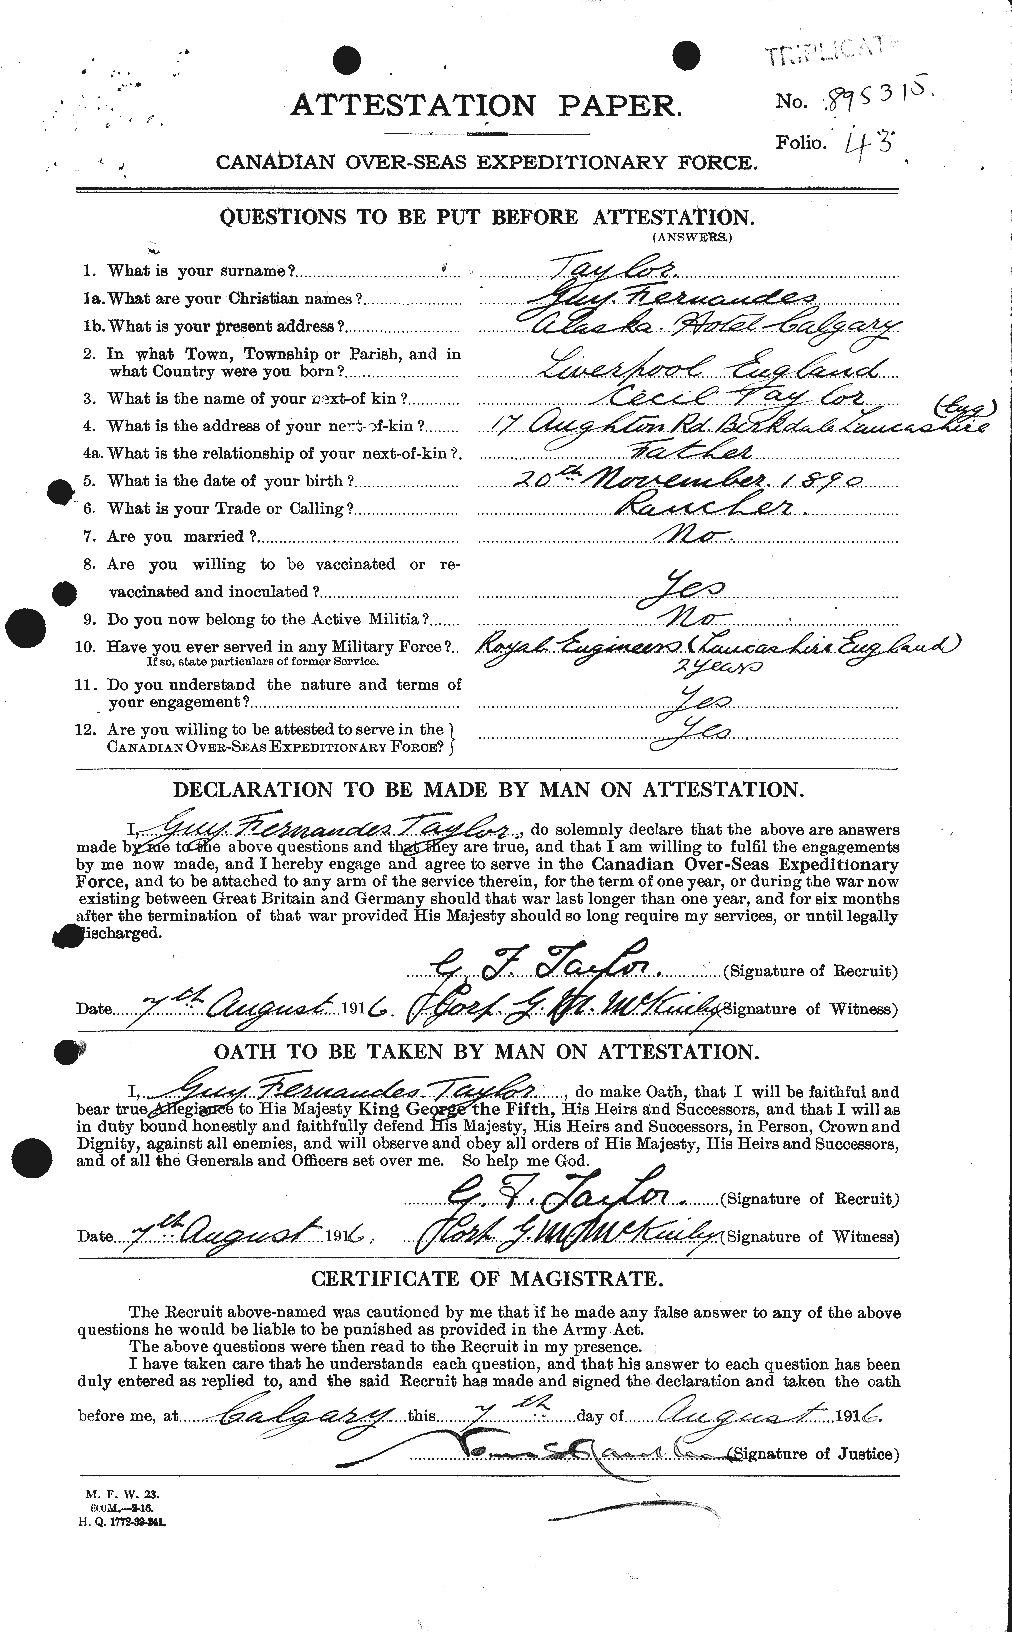 Personnel Records of the First World War - CEF 626396a